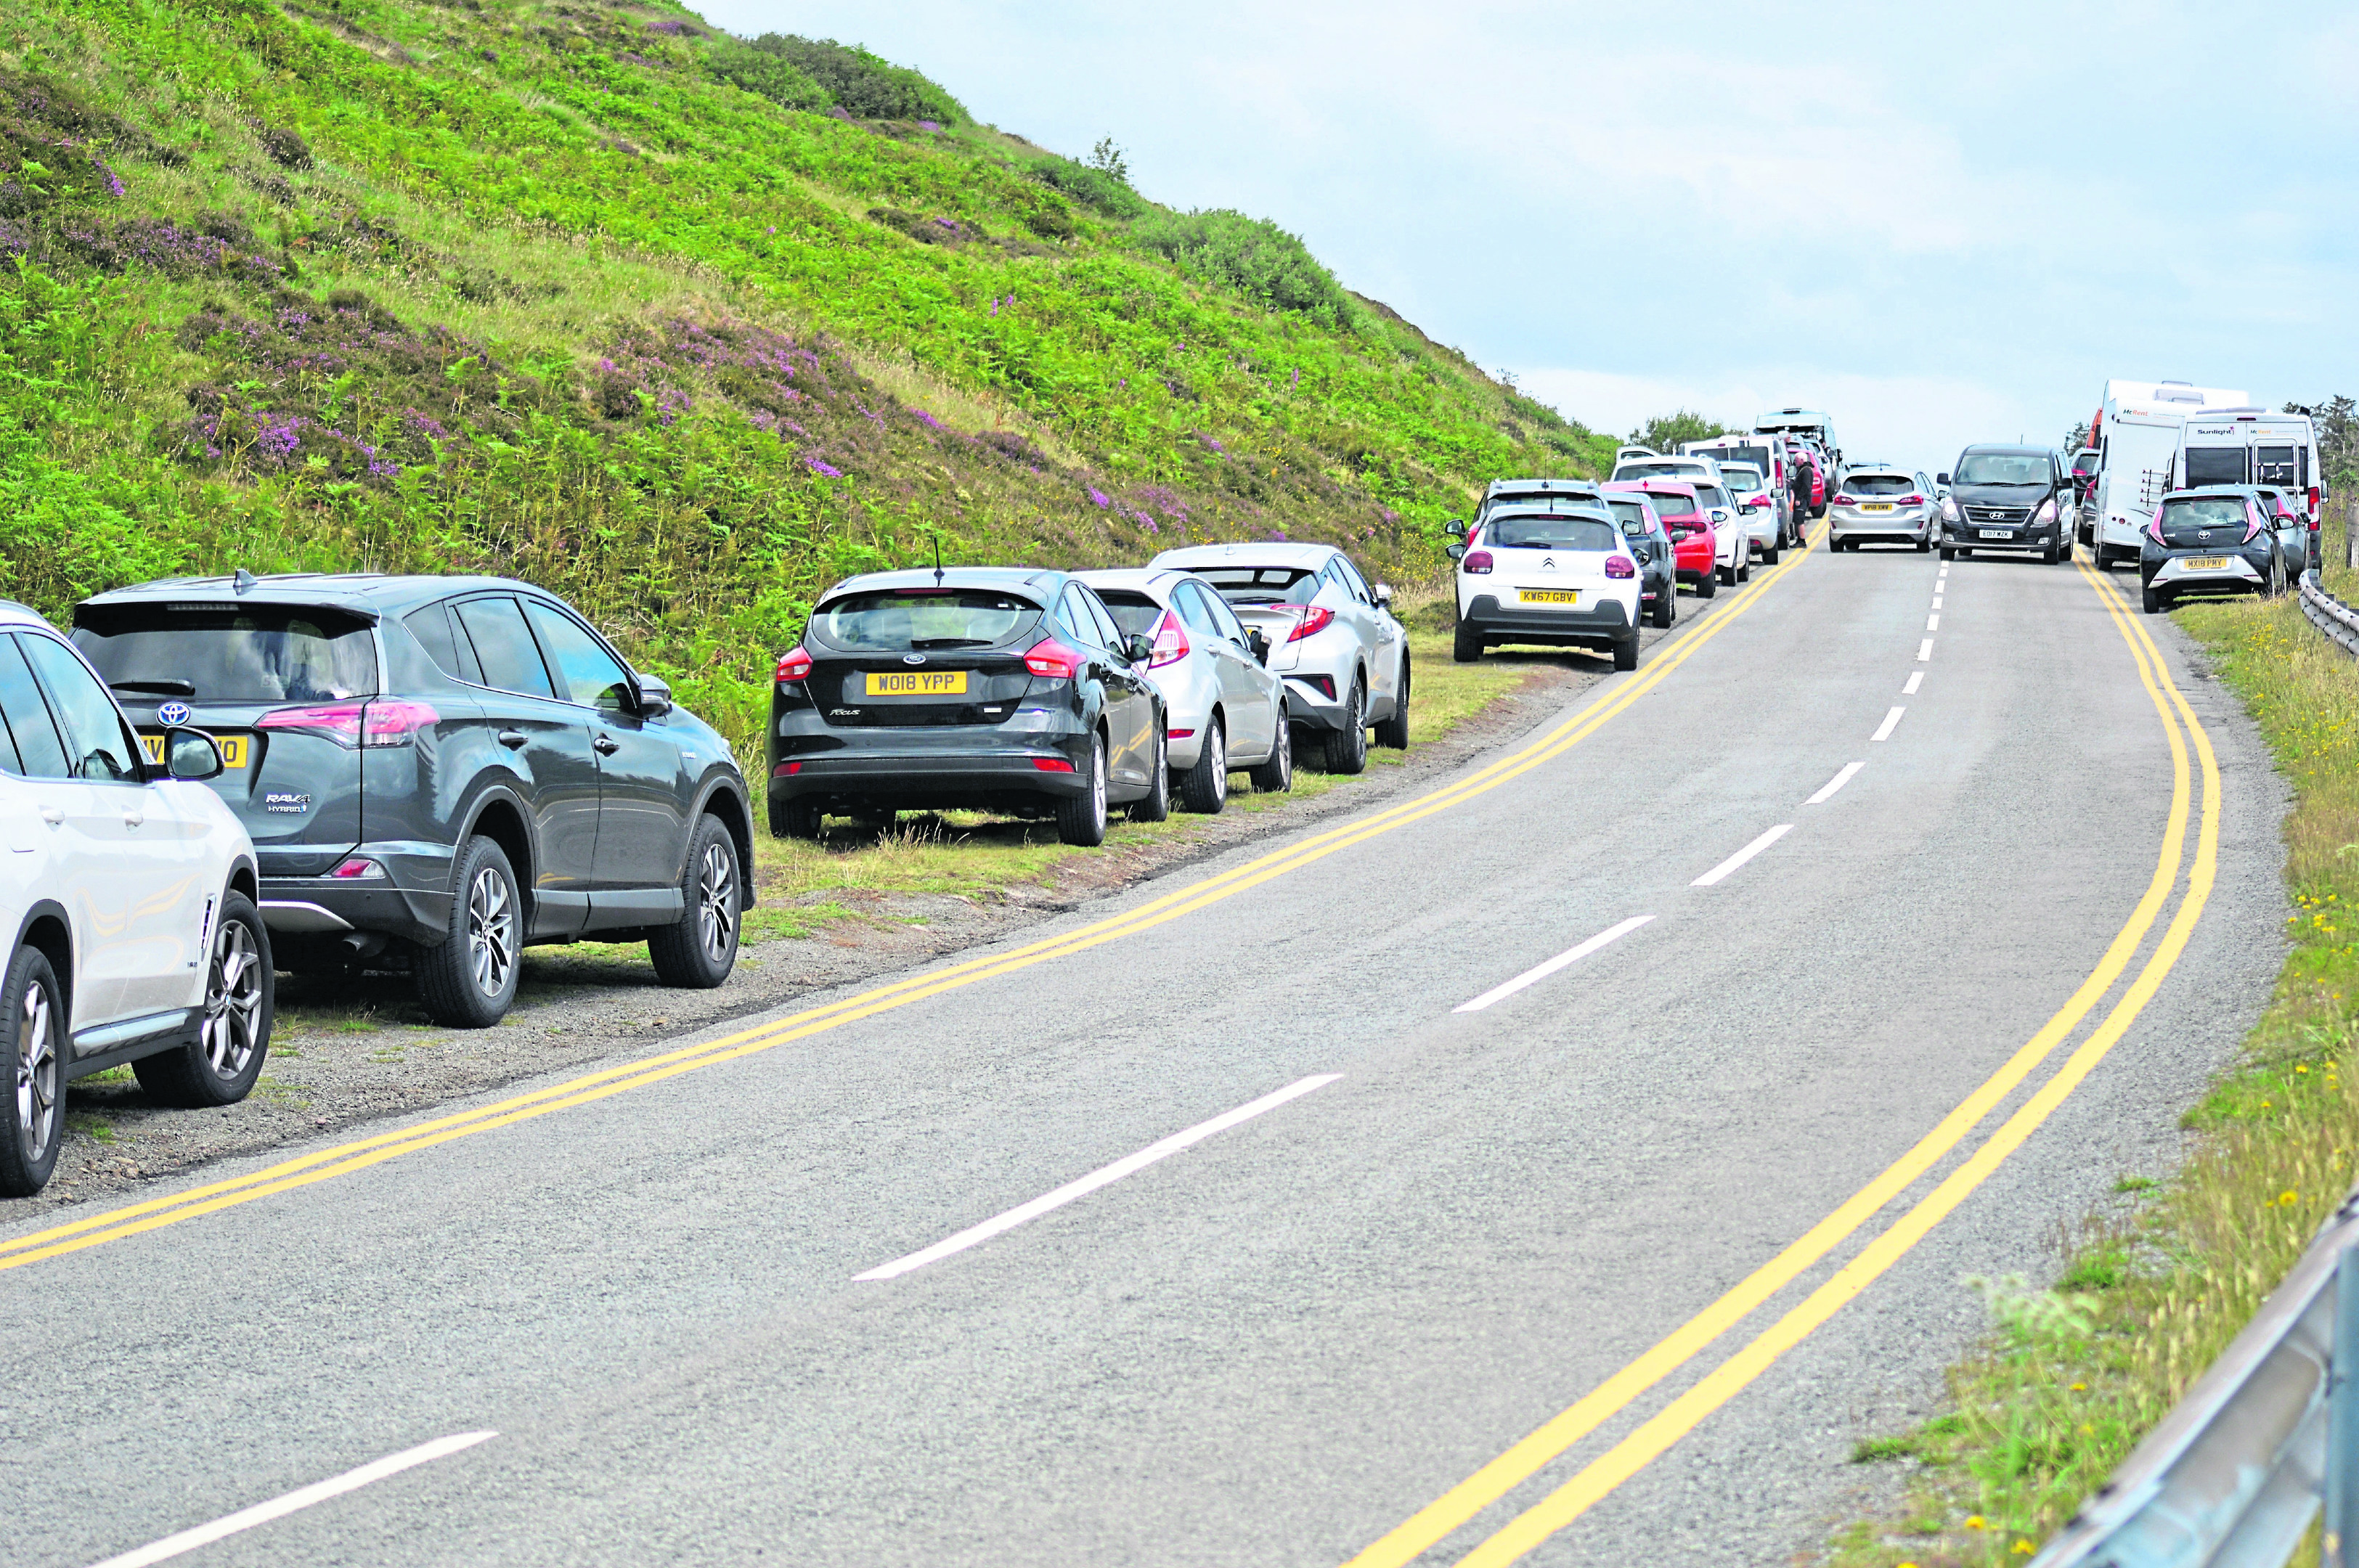 Tourist cars on the Isle of Skye fill up the side of the road as the nearby Old Man of Storr visitor car park is full.